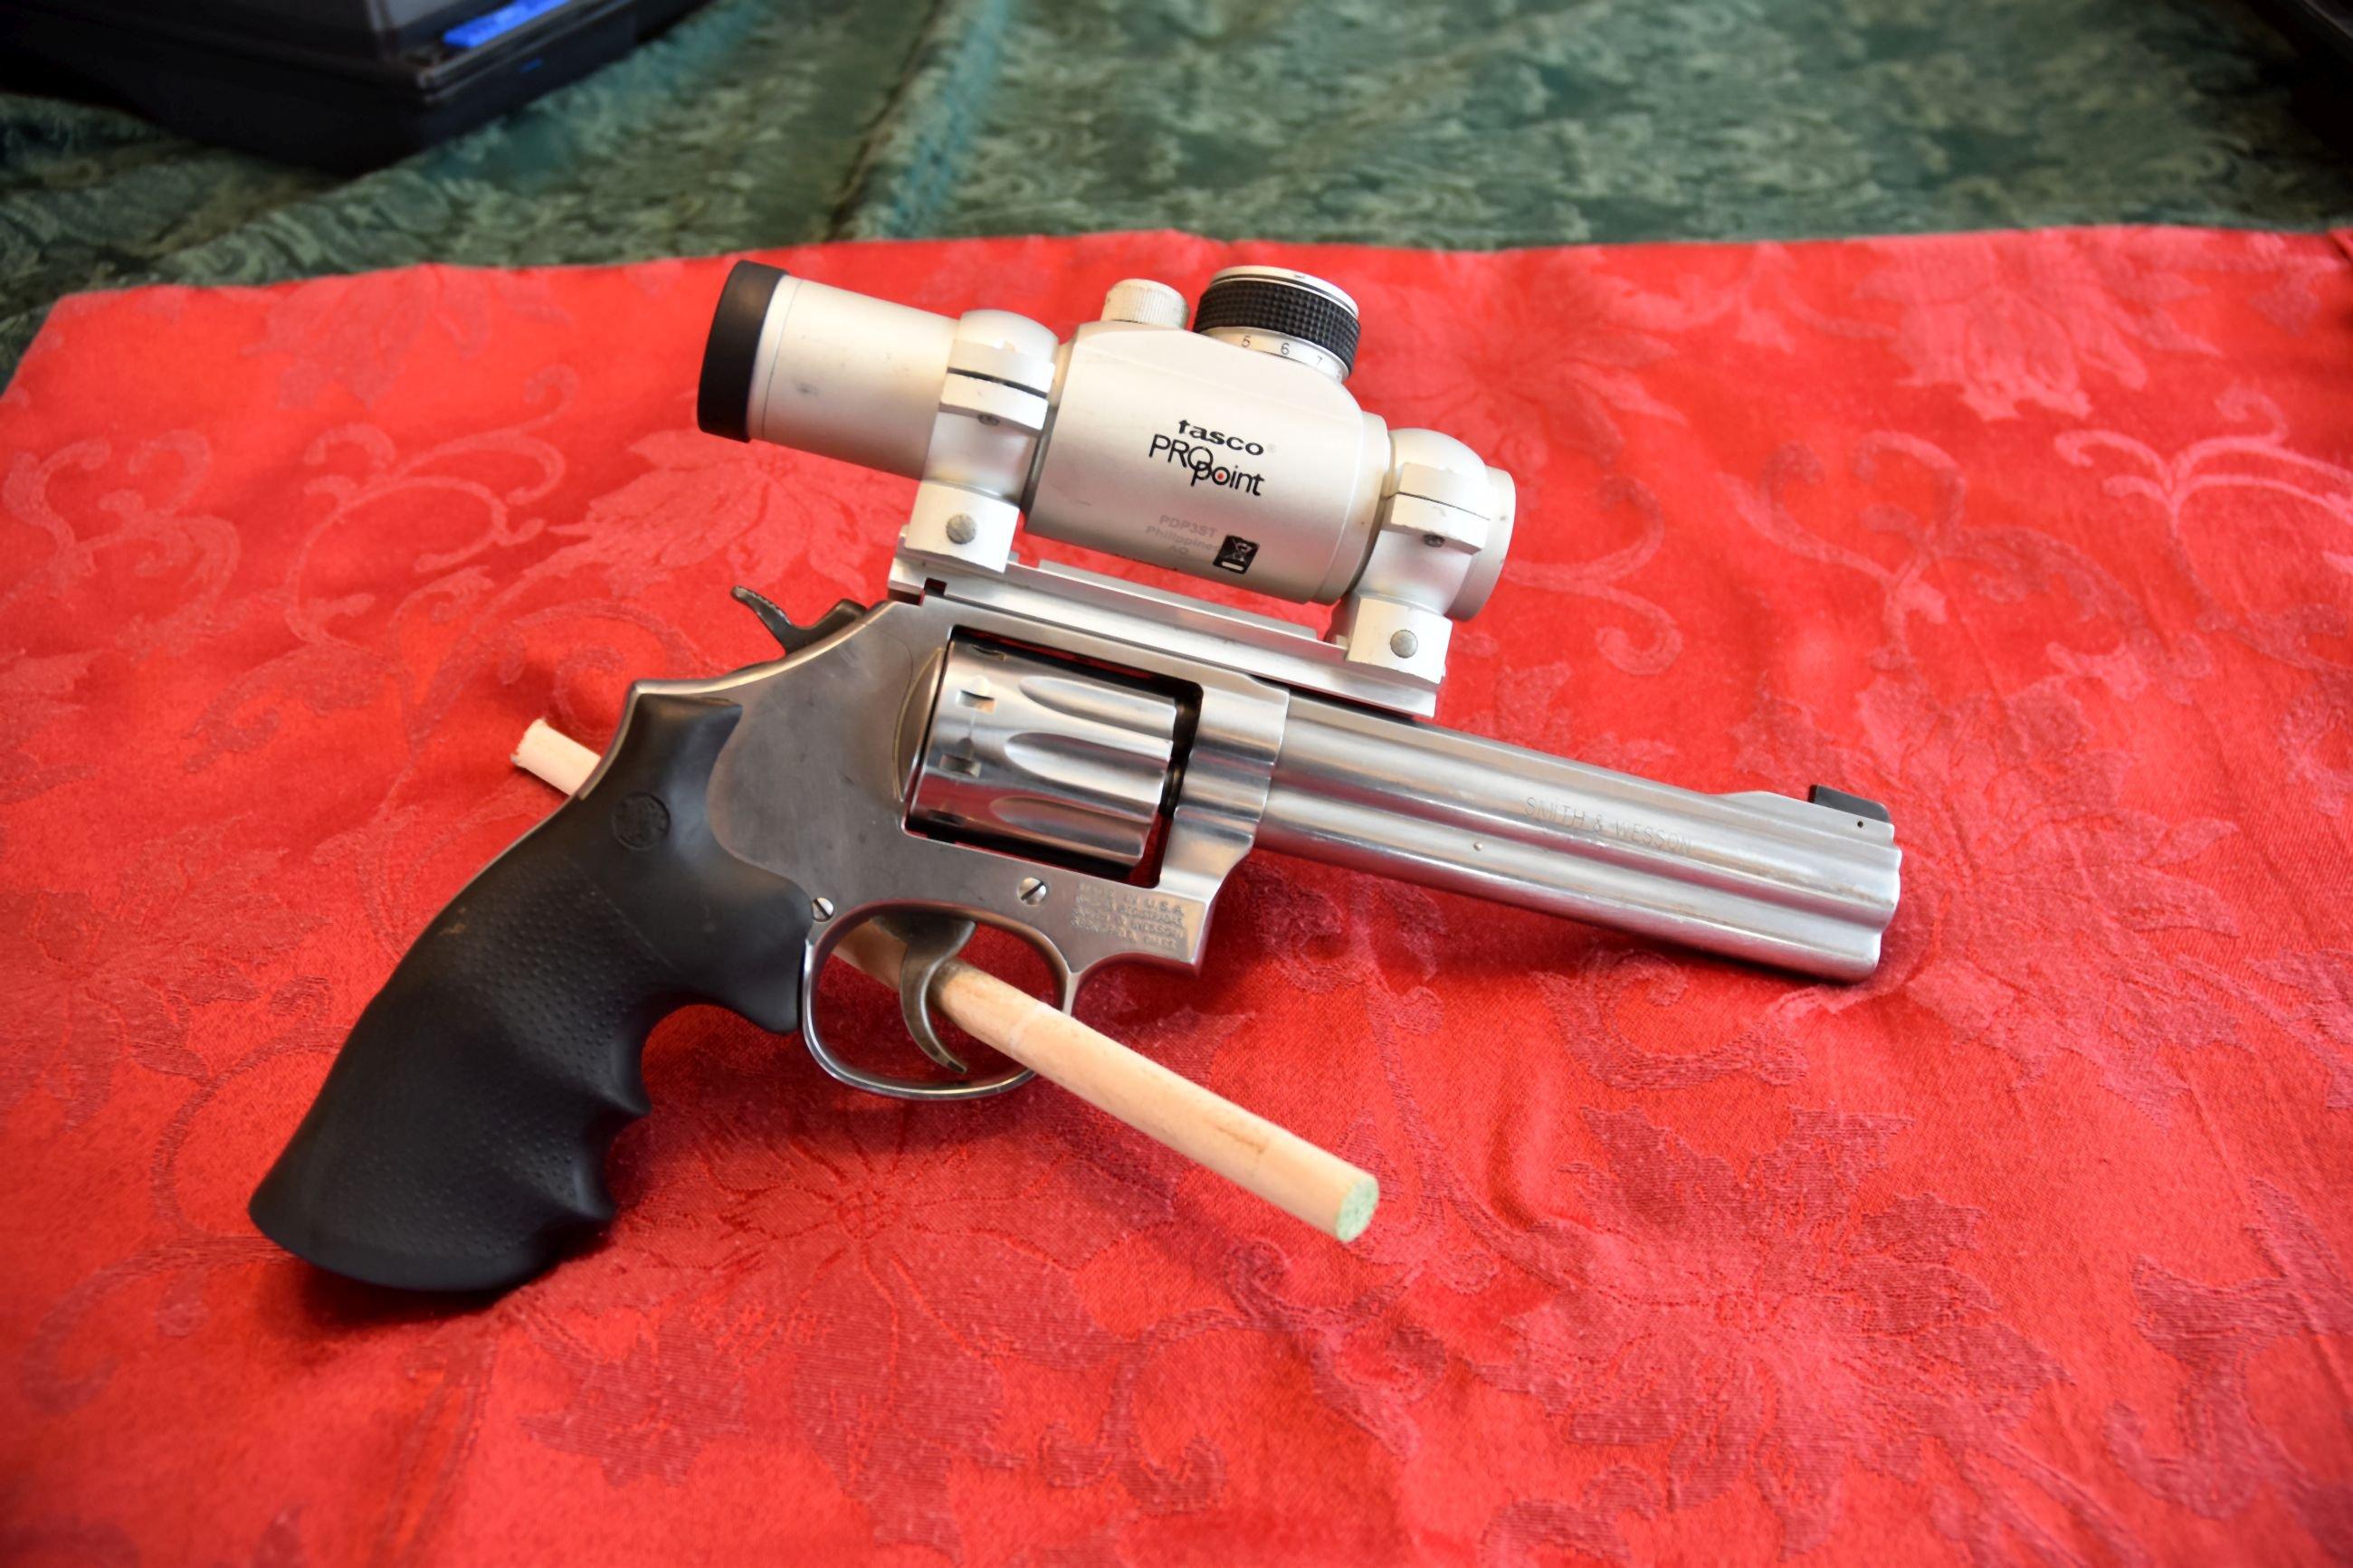 S&W 22 Cal. Revolver with Tasco Pro Poitn Scope, Stainless Steel, 10 Shot, With 2 Fast Loaders, Case